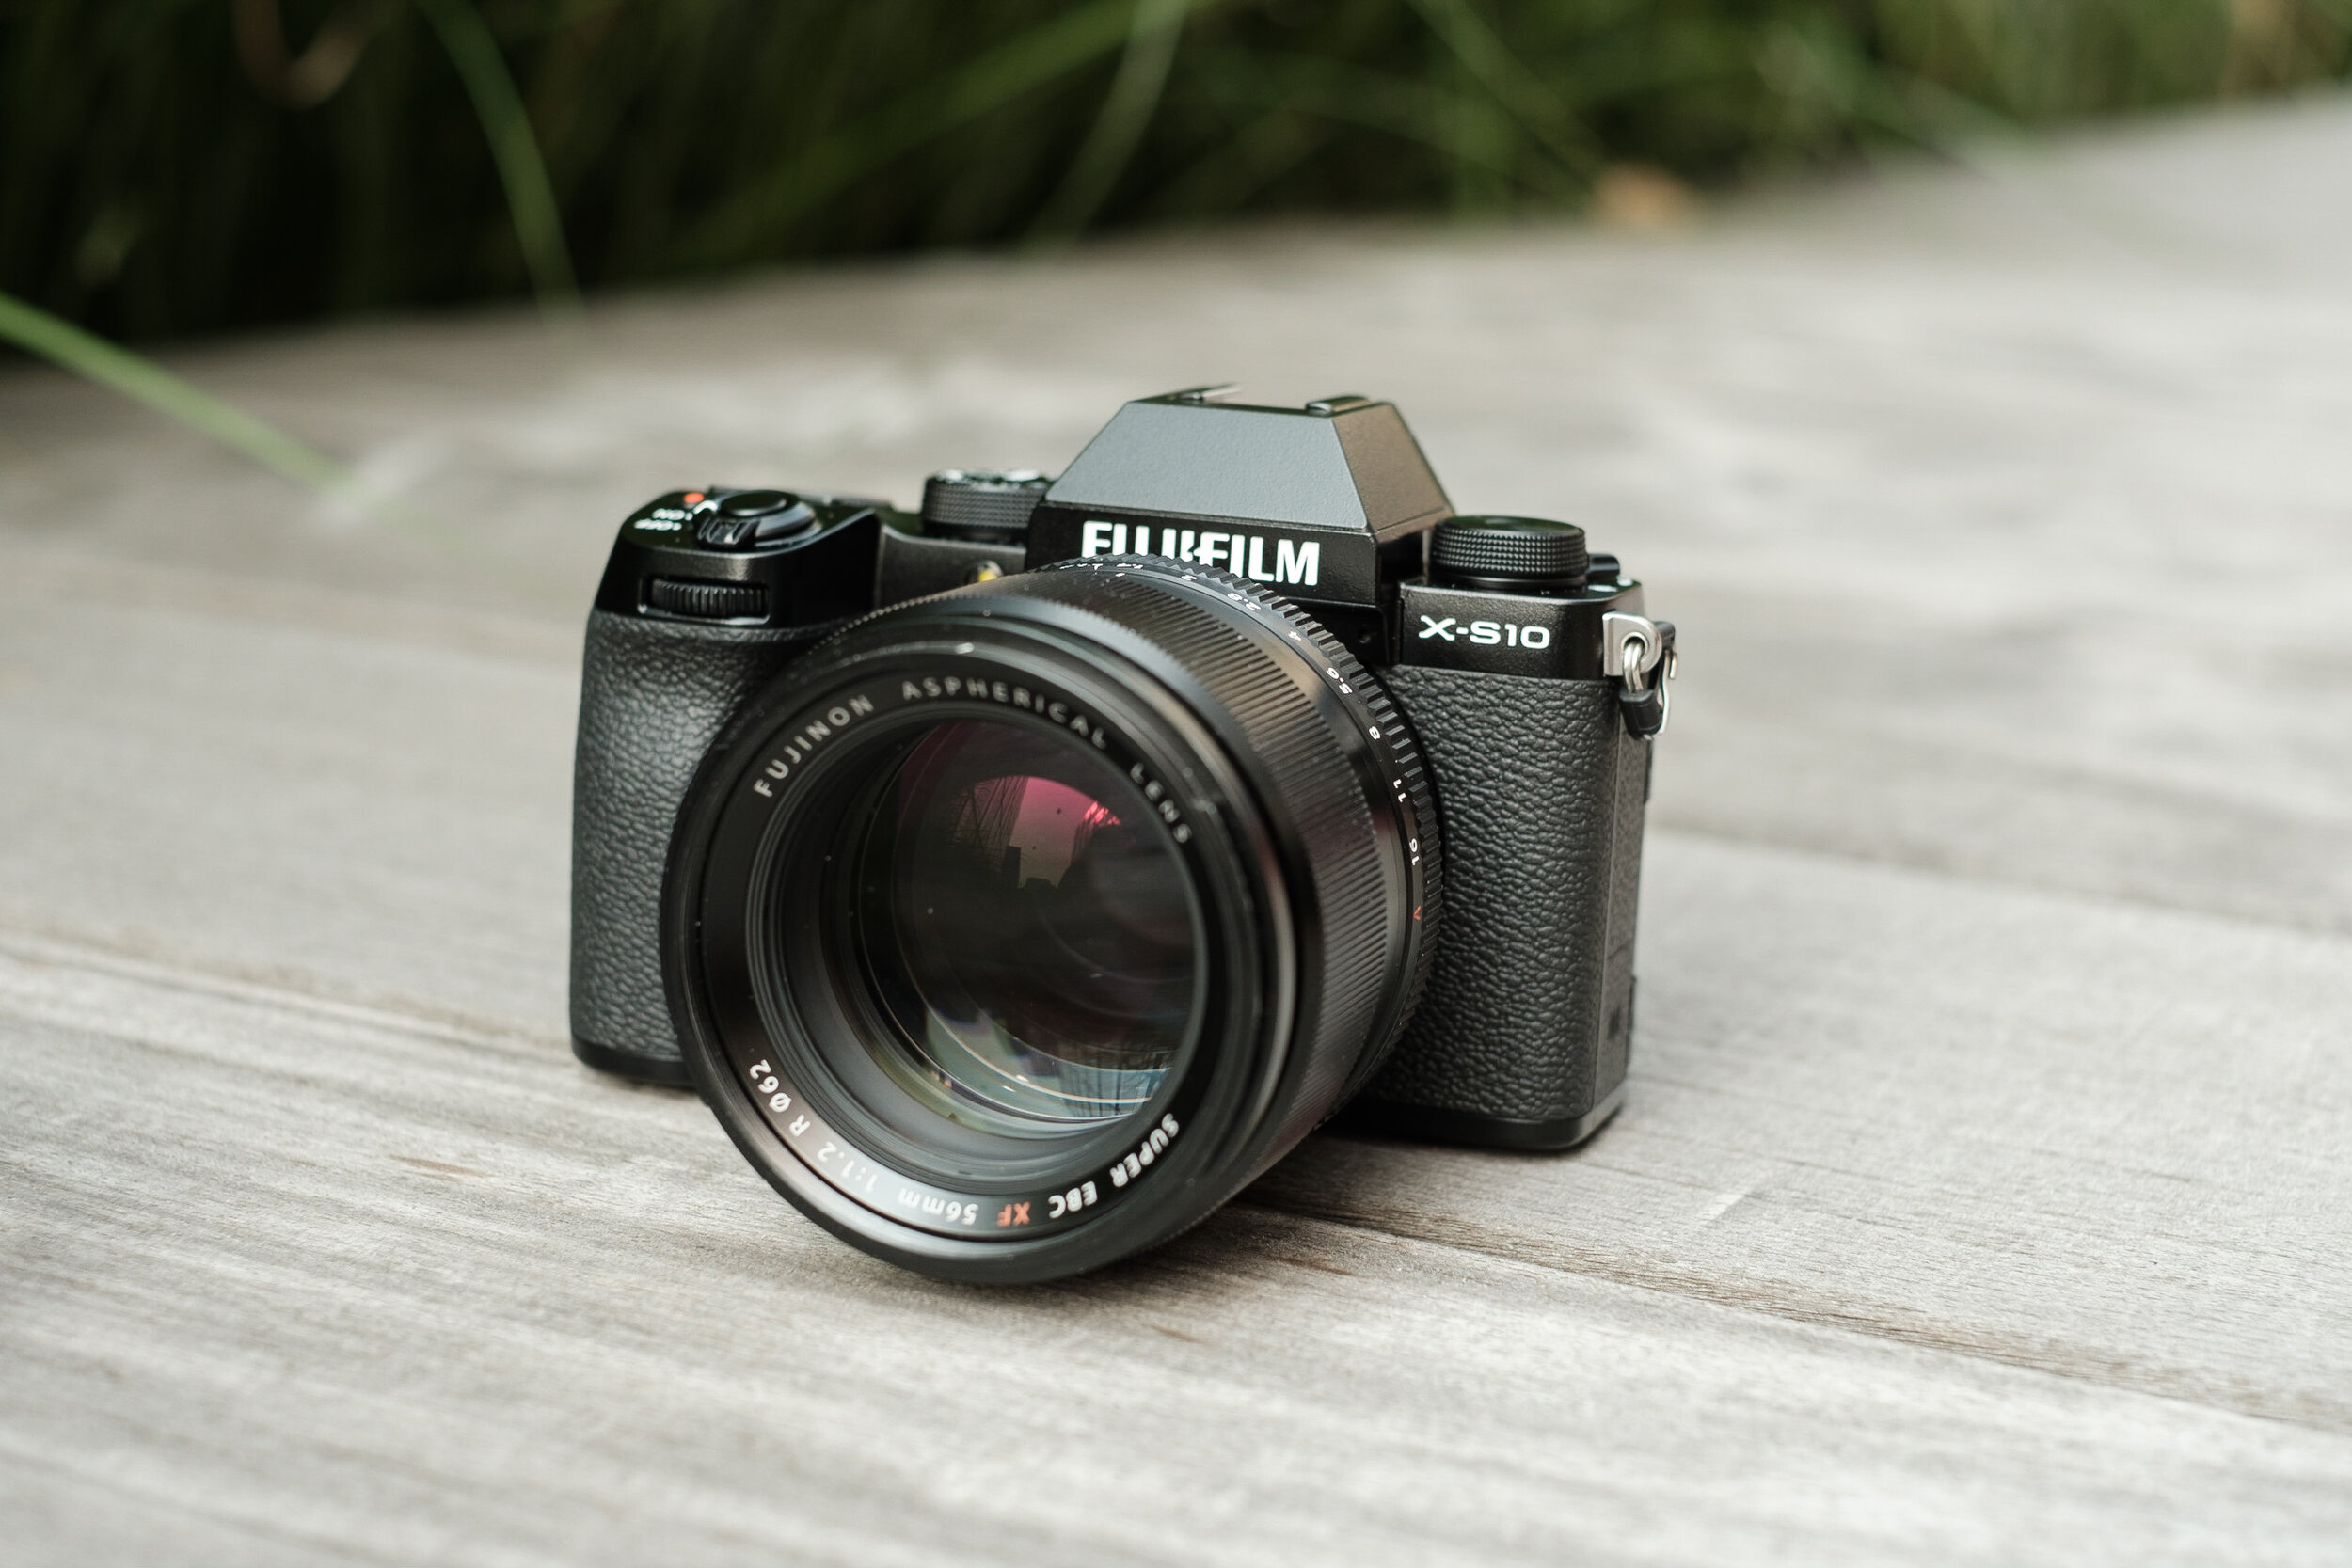 Hands-on with the Fujifilm X-S10 — Kate Hailey